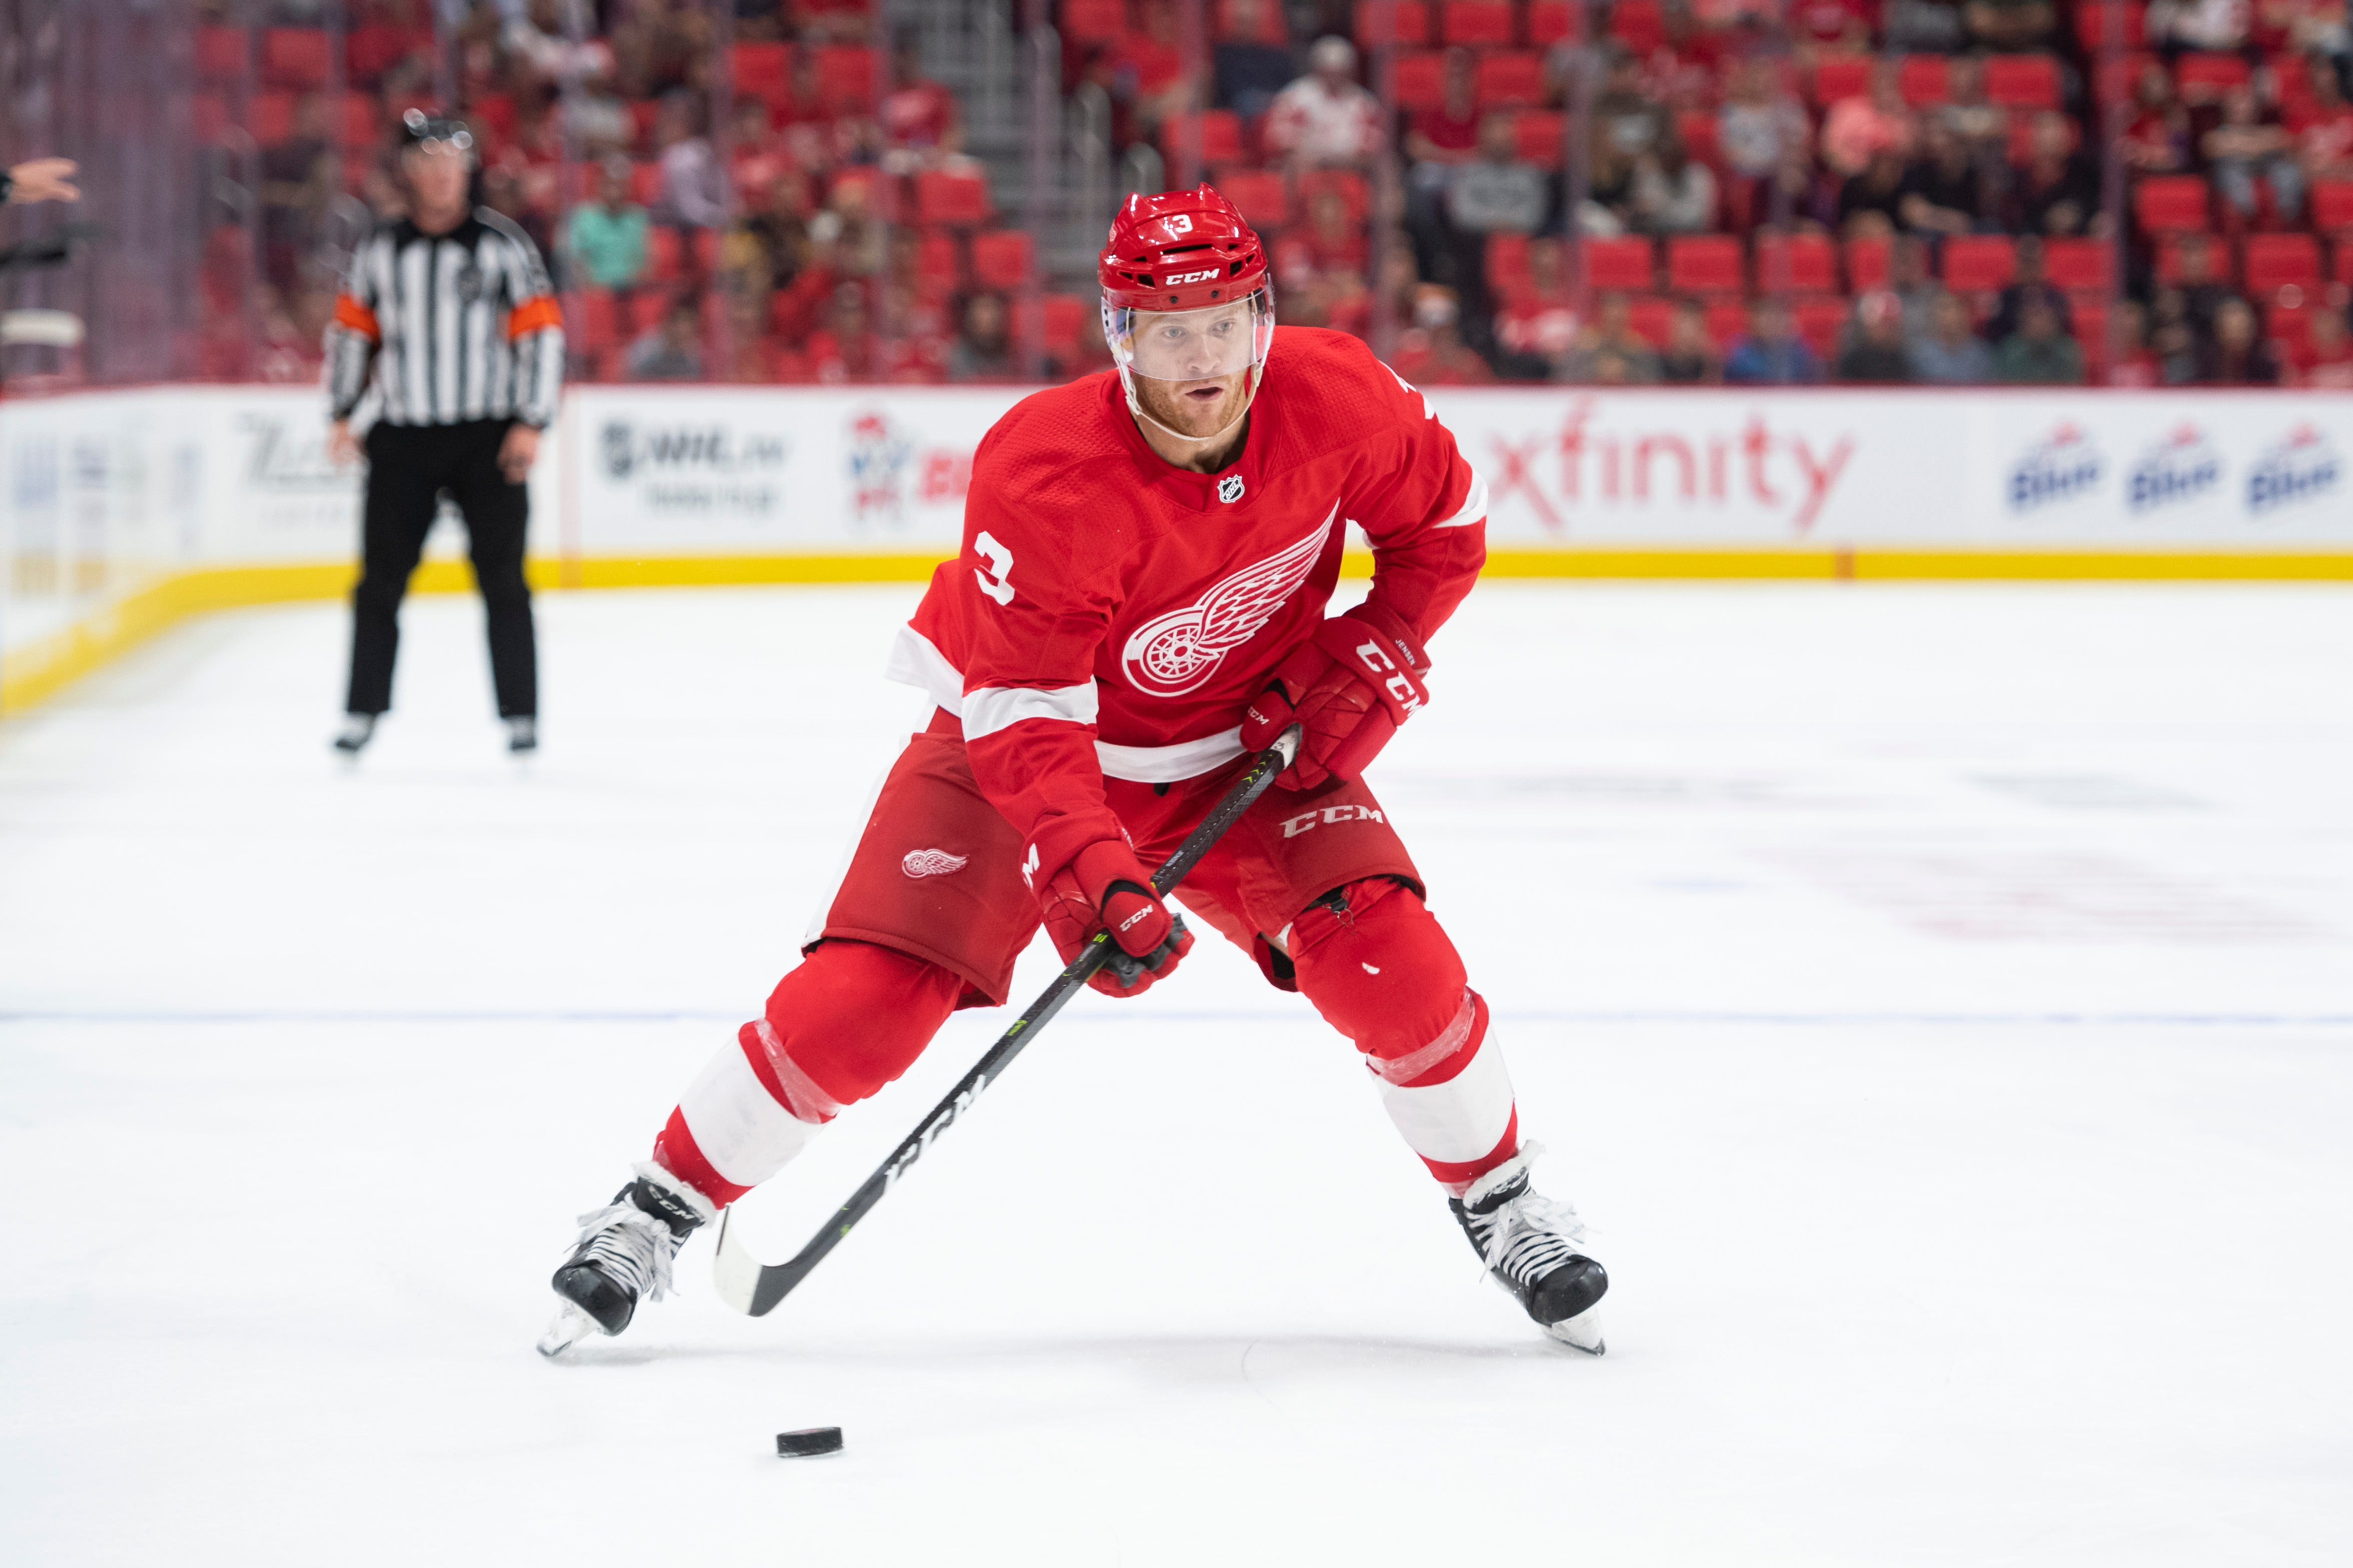 NICK JENSEN: AGE: 28. HT: 6-0. WT: 198. STATS: 81 games, 0 goals, 15 assists, 15 points. ANALYSIS: As the young defensemen get more playing time and become comfortable in the NHL, Jensen could become trade bait at the deadline.